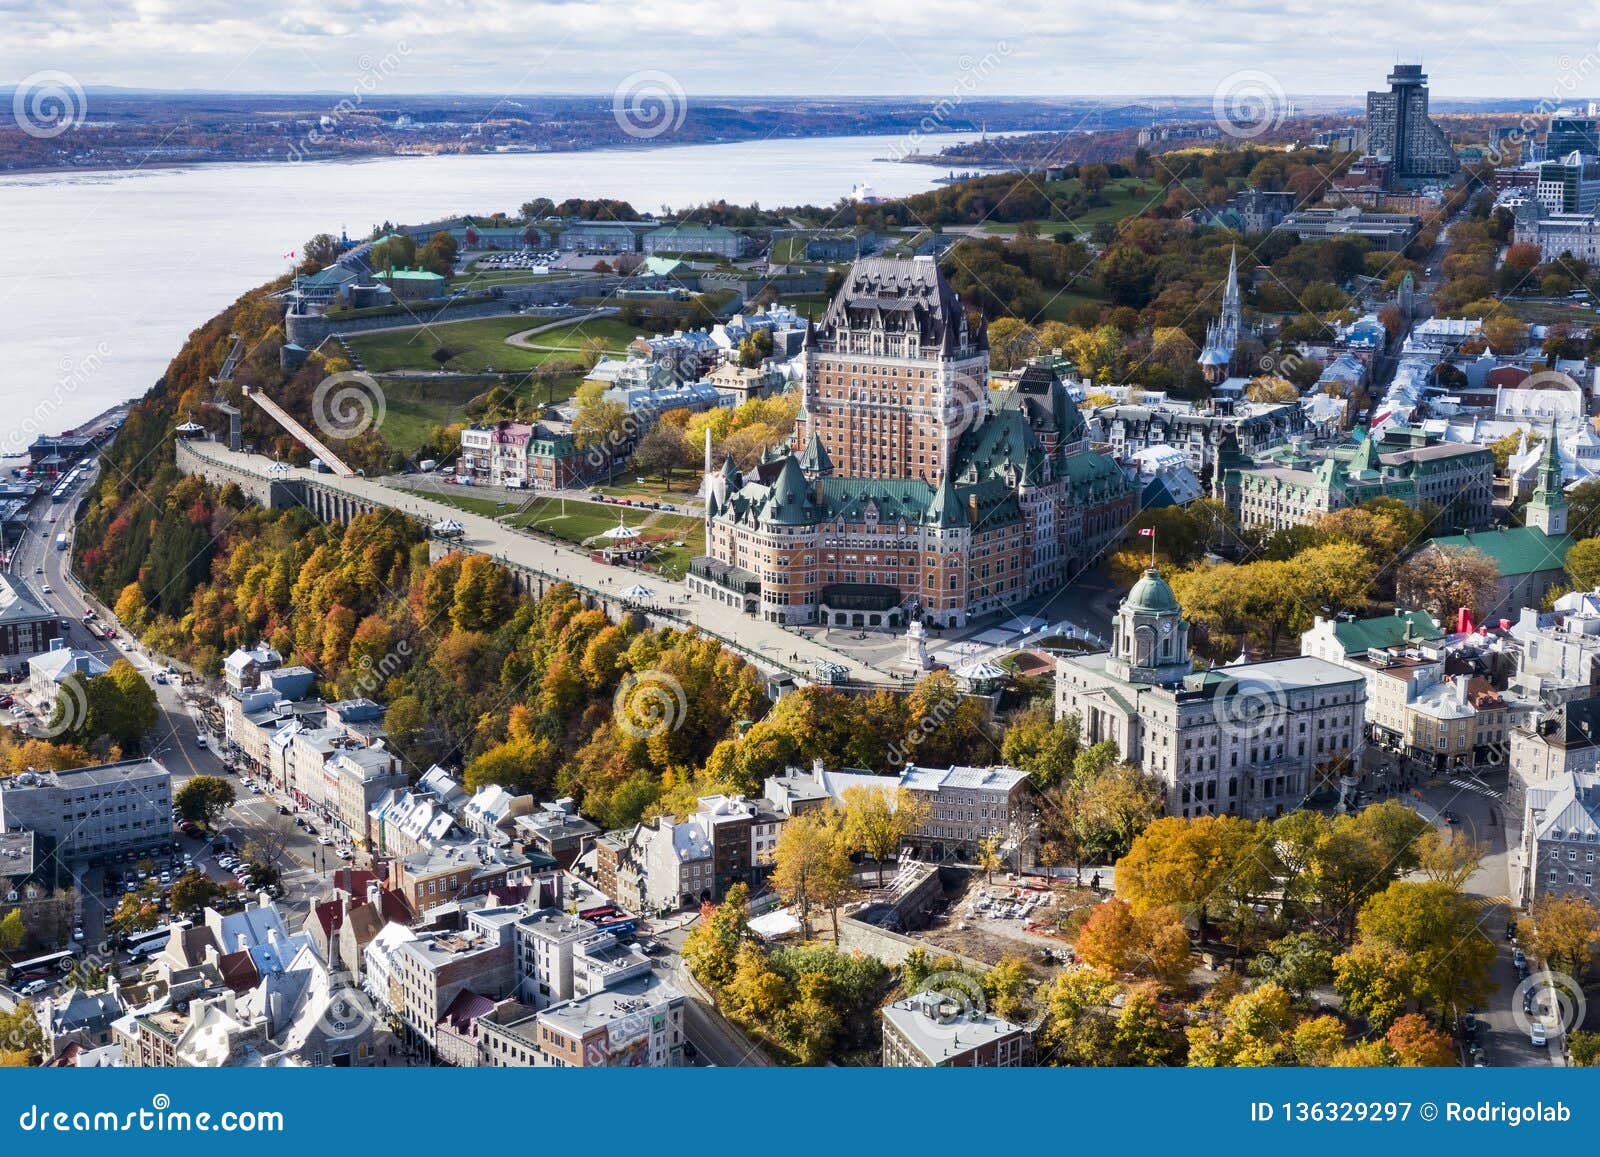 aerial view of old quebec city in the fall season, quebec, canada